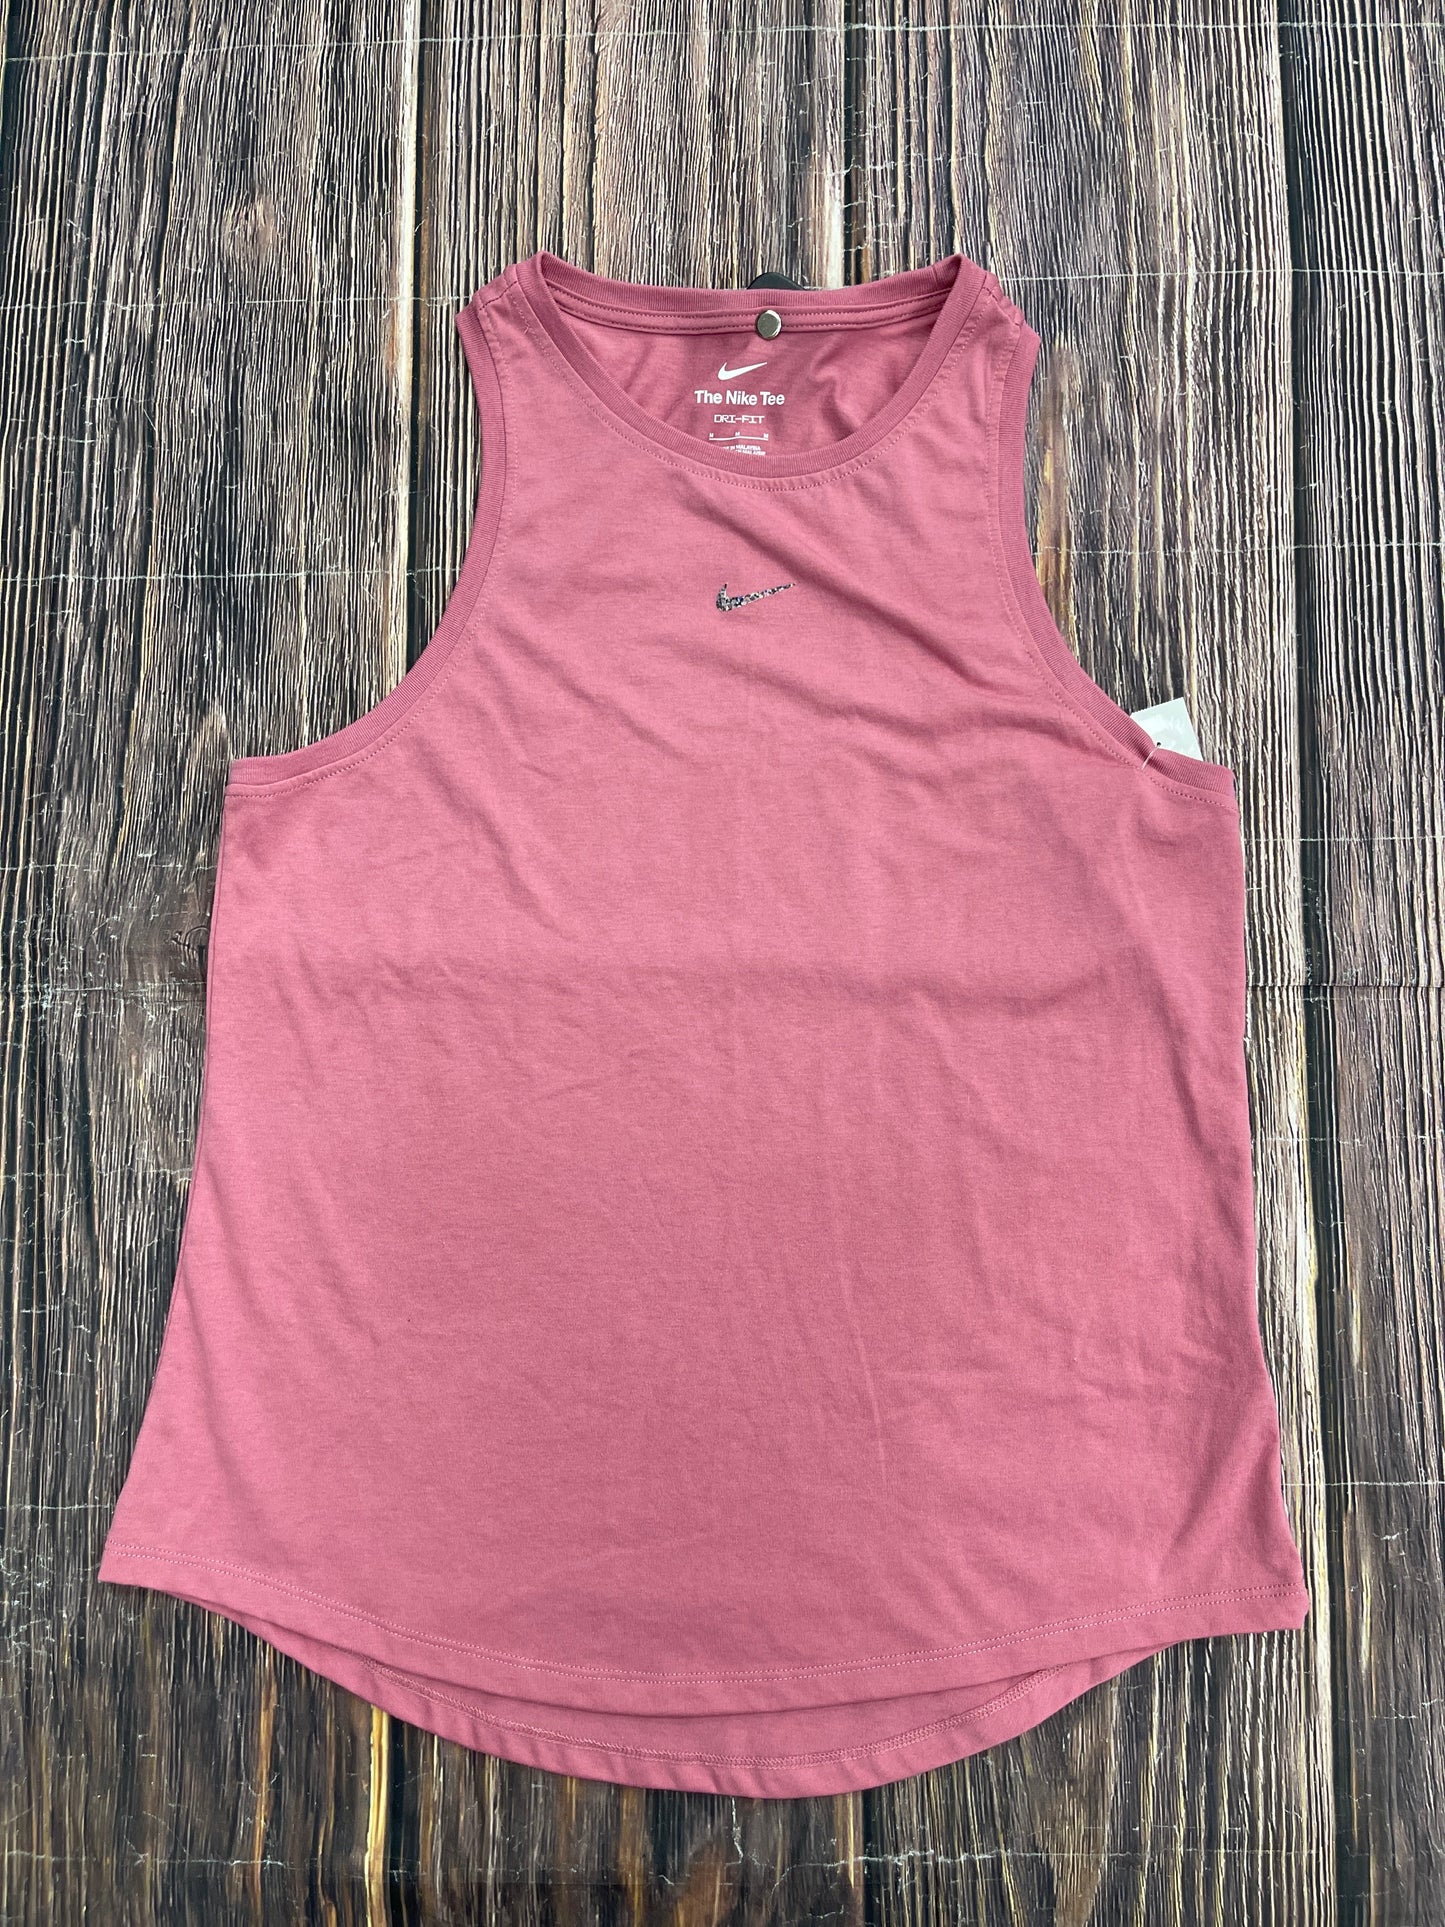 Pink Athletic Tank Top Nike, Size M